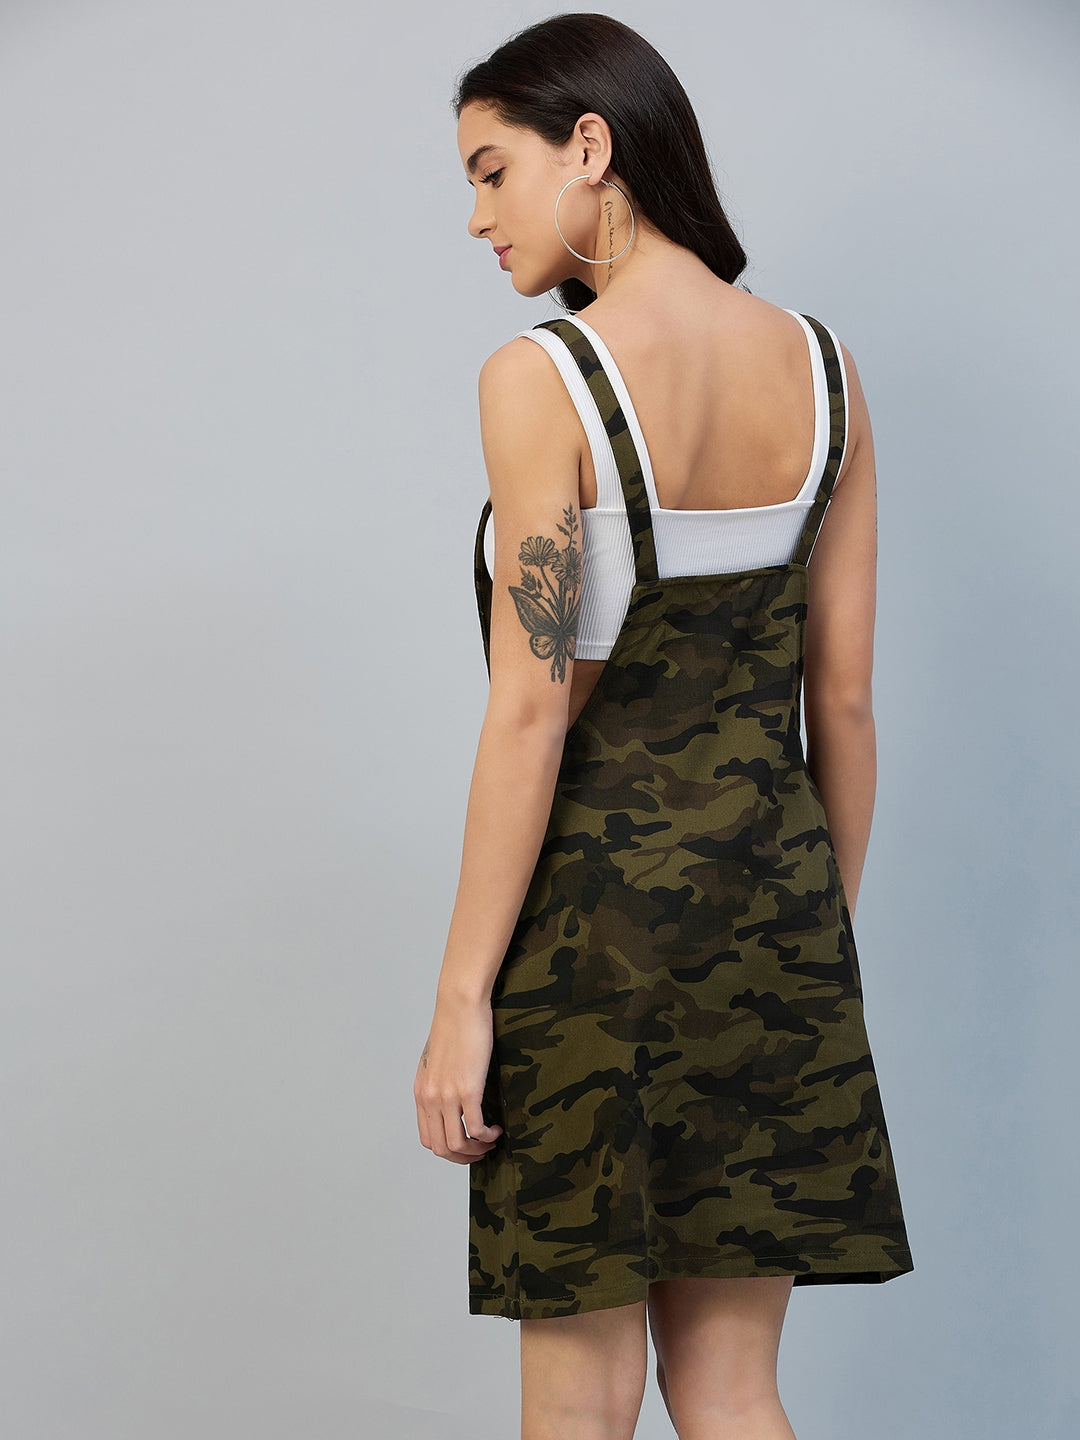 Women's Army Print Cotton Twill Dungaree (Inner top not included)